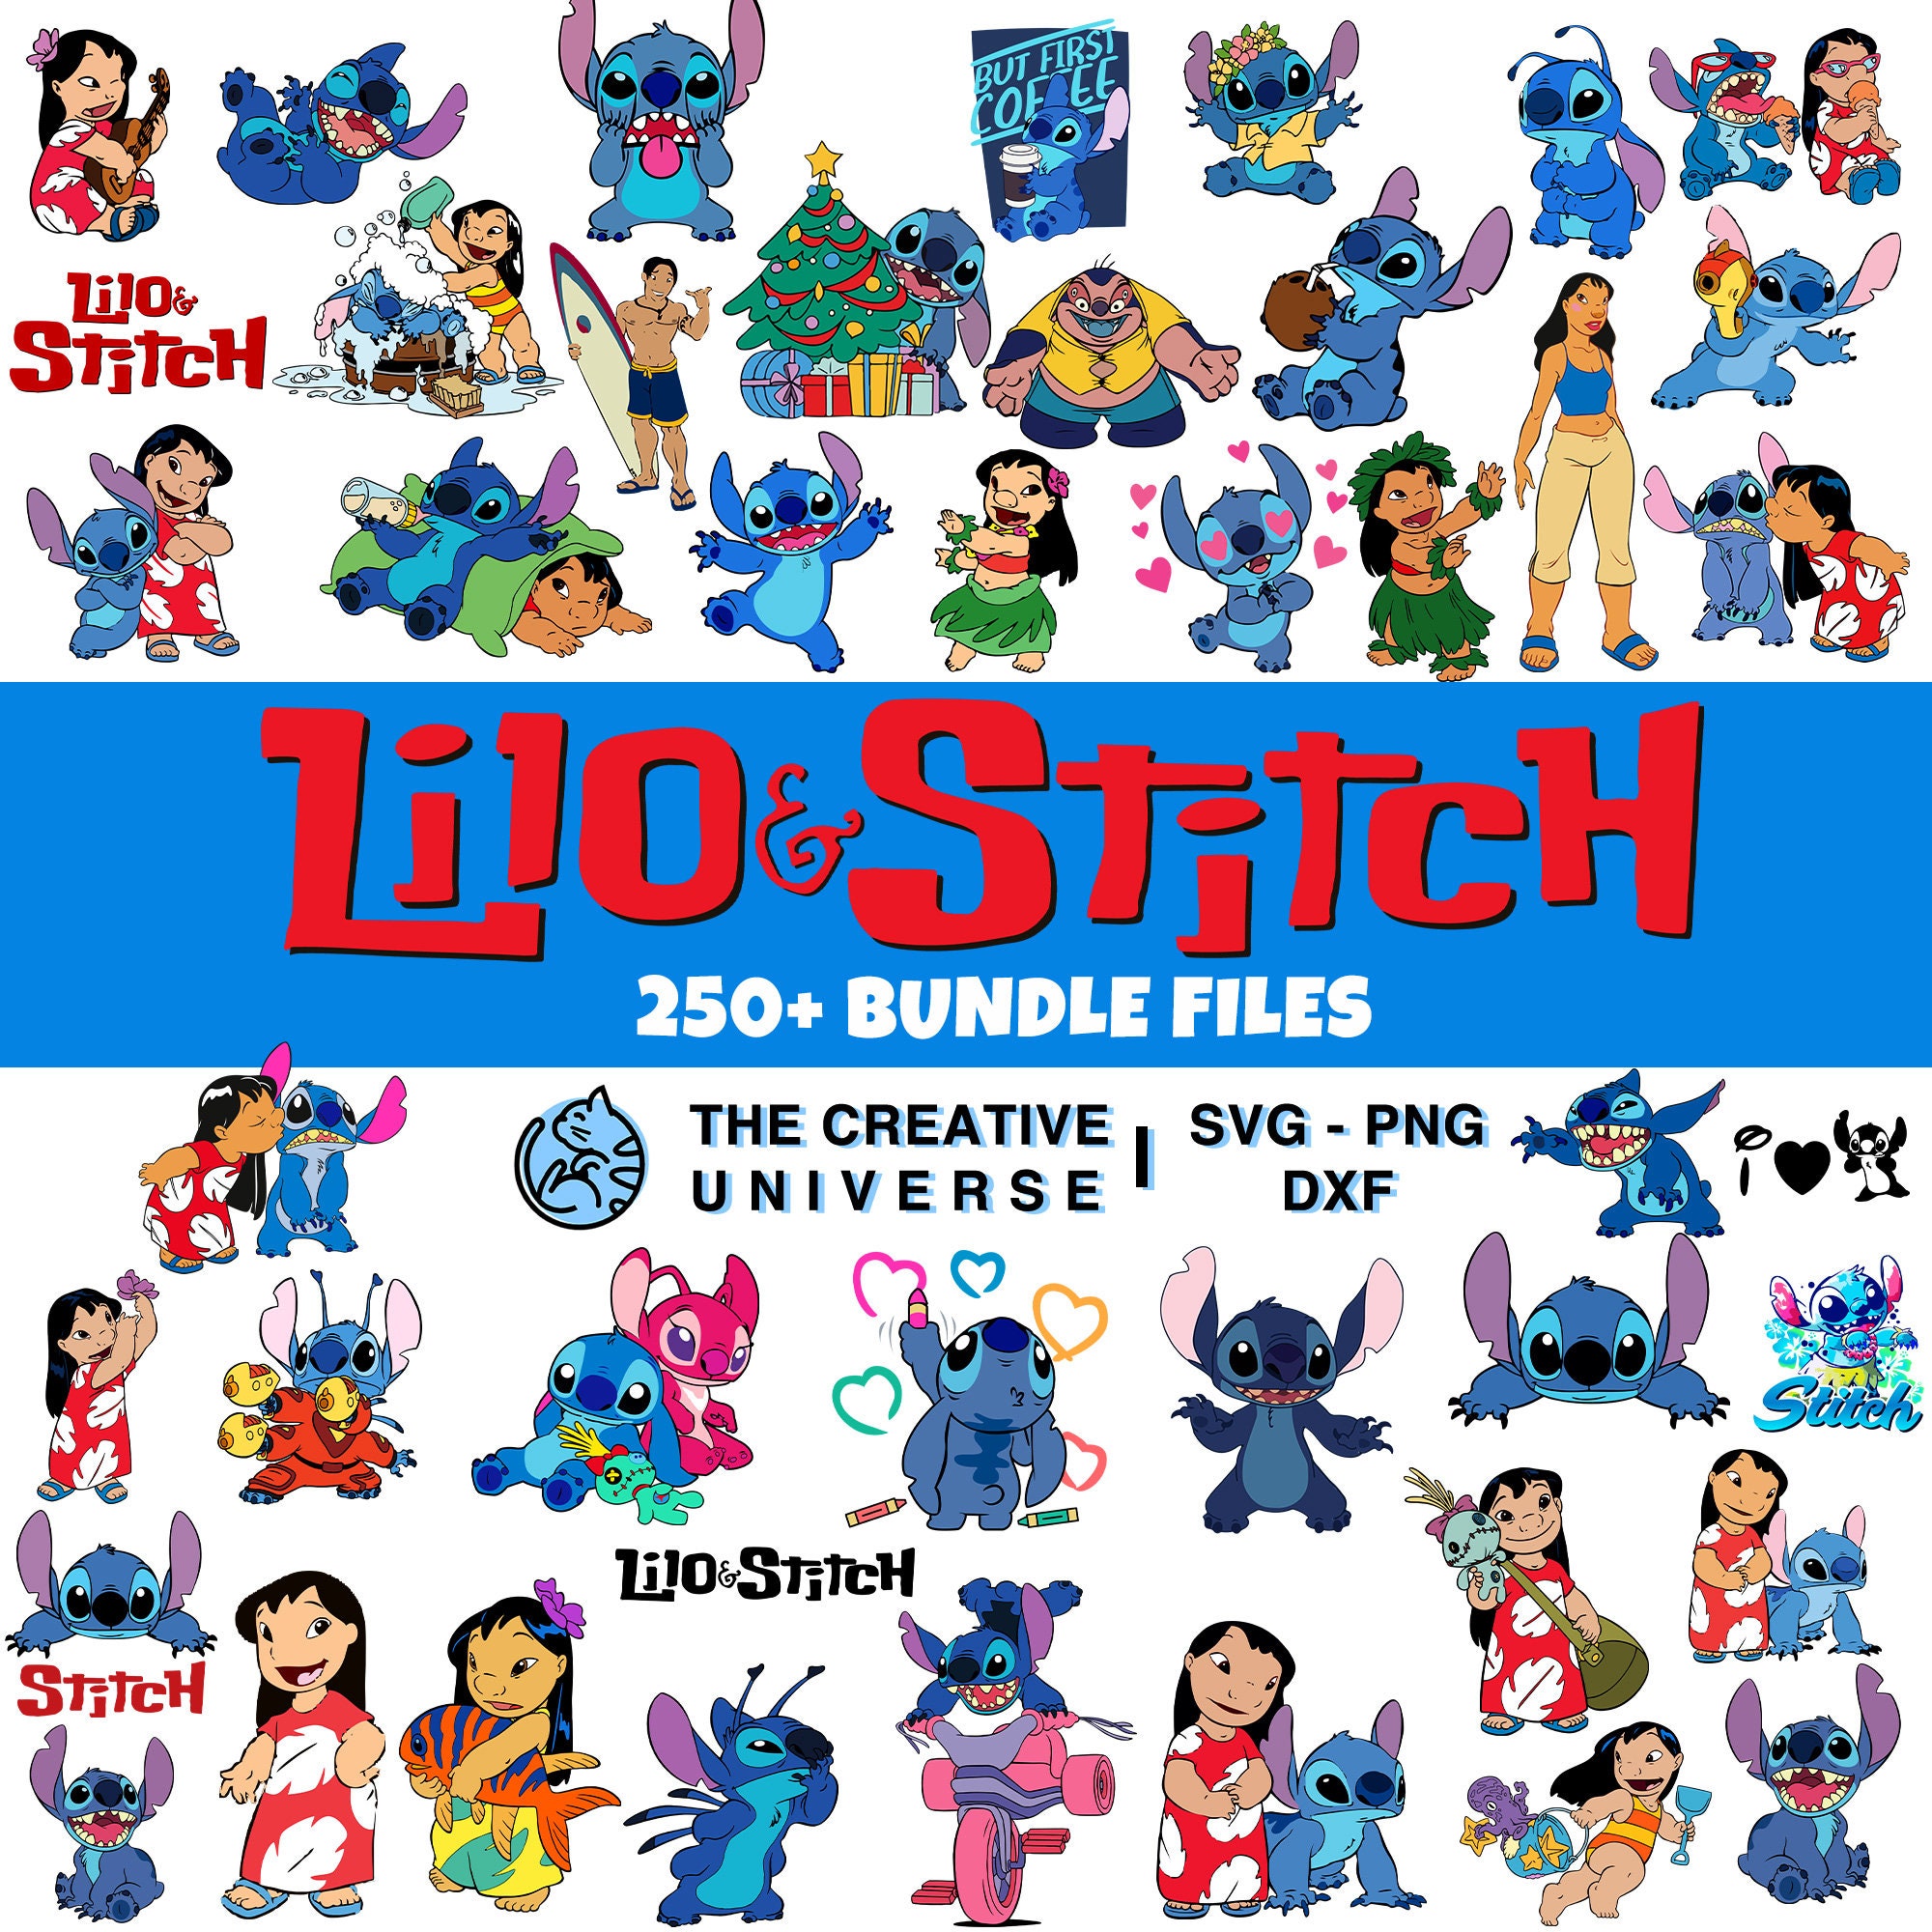 689 Angel Stitch Images, Stock Photos, 3D objects, & Vectors